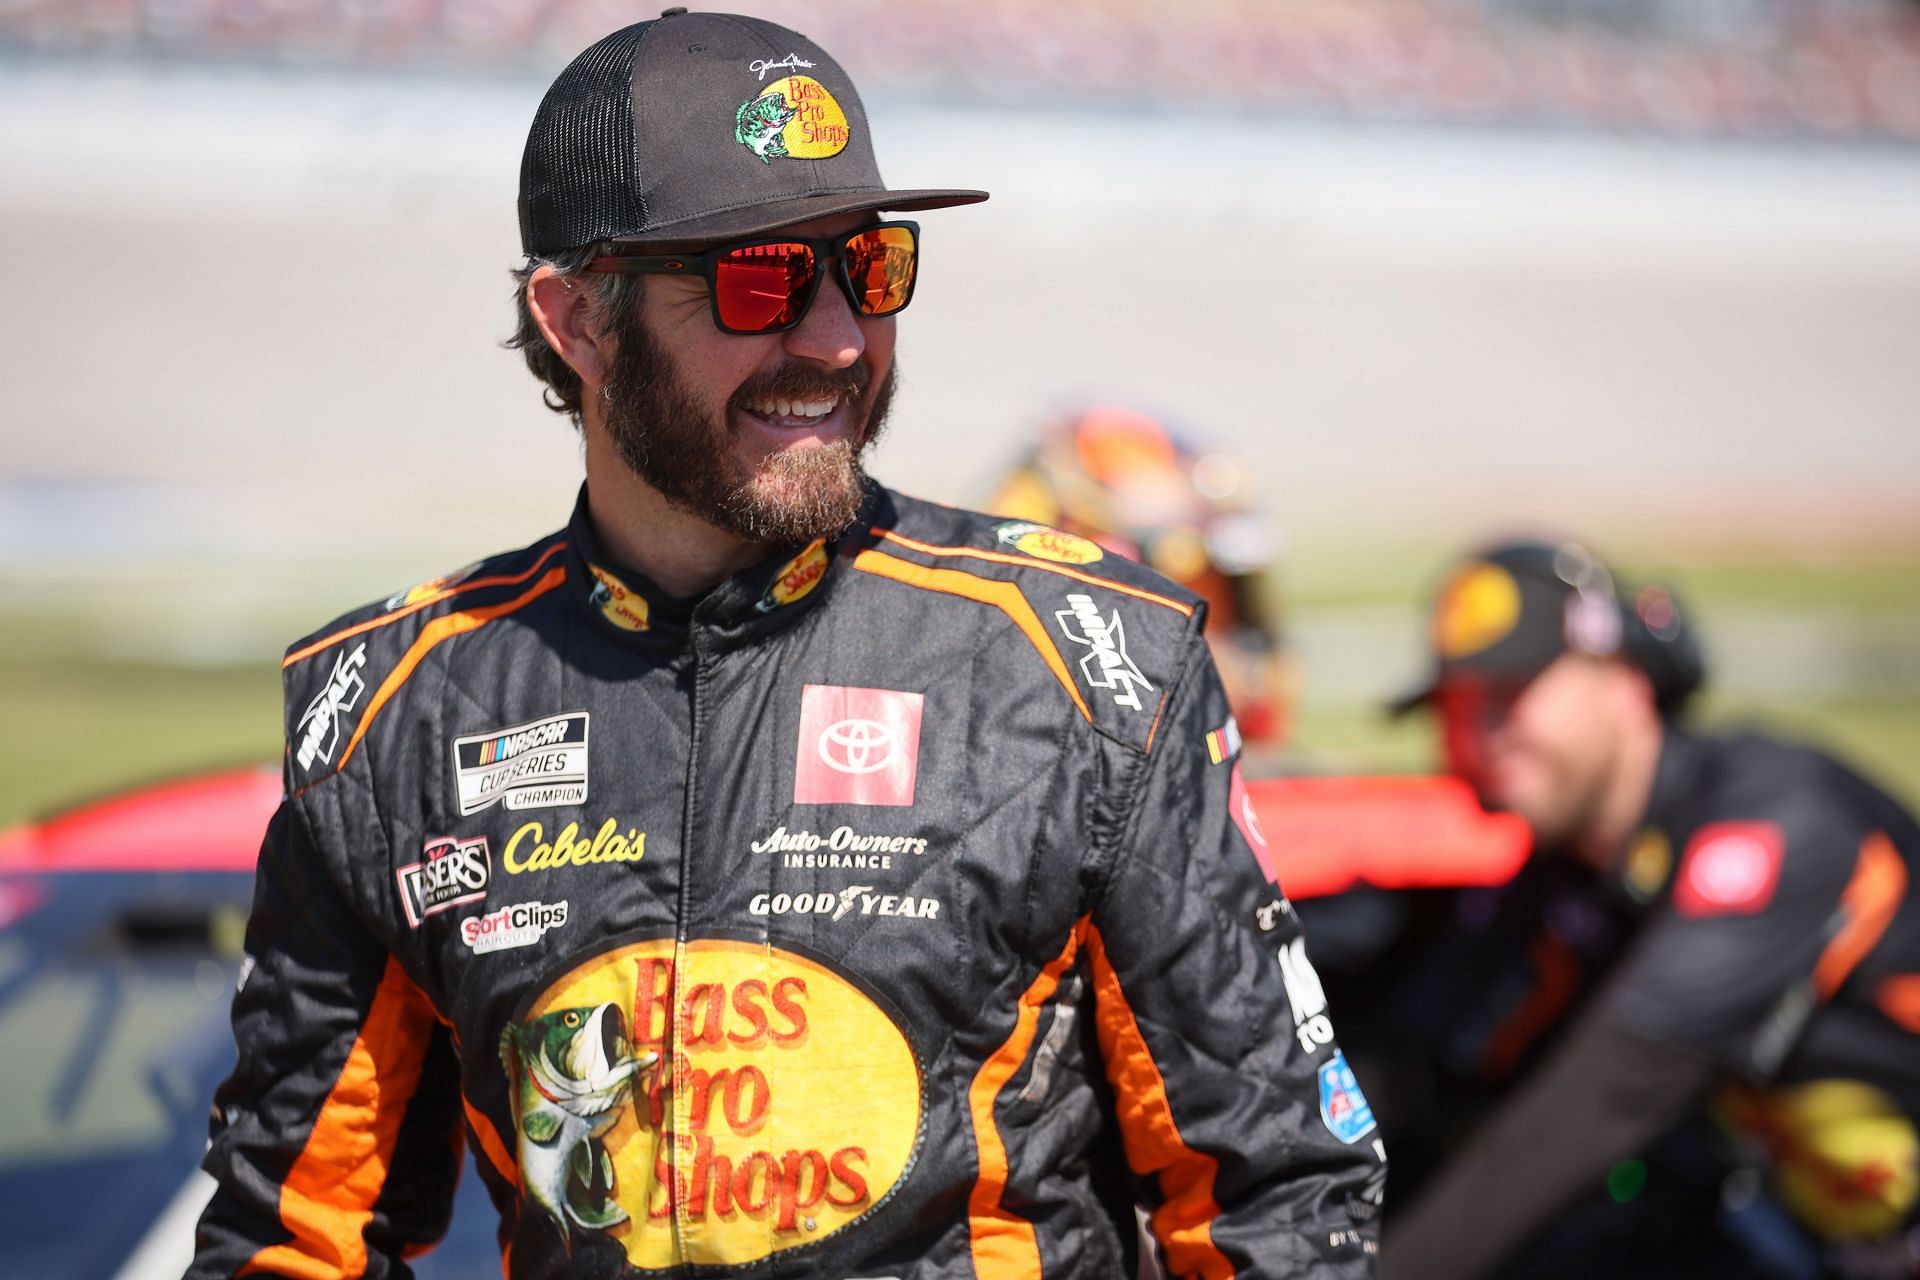 Martin Truex Jr. walks the grid during qualifying for the NASCAR Cup Series GEICO 500 at Talladega Superspeedway.